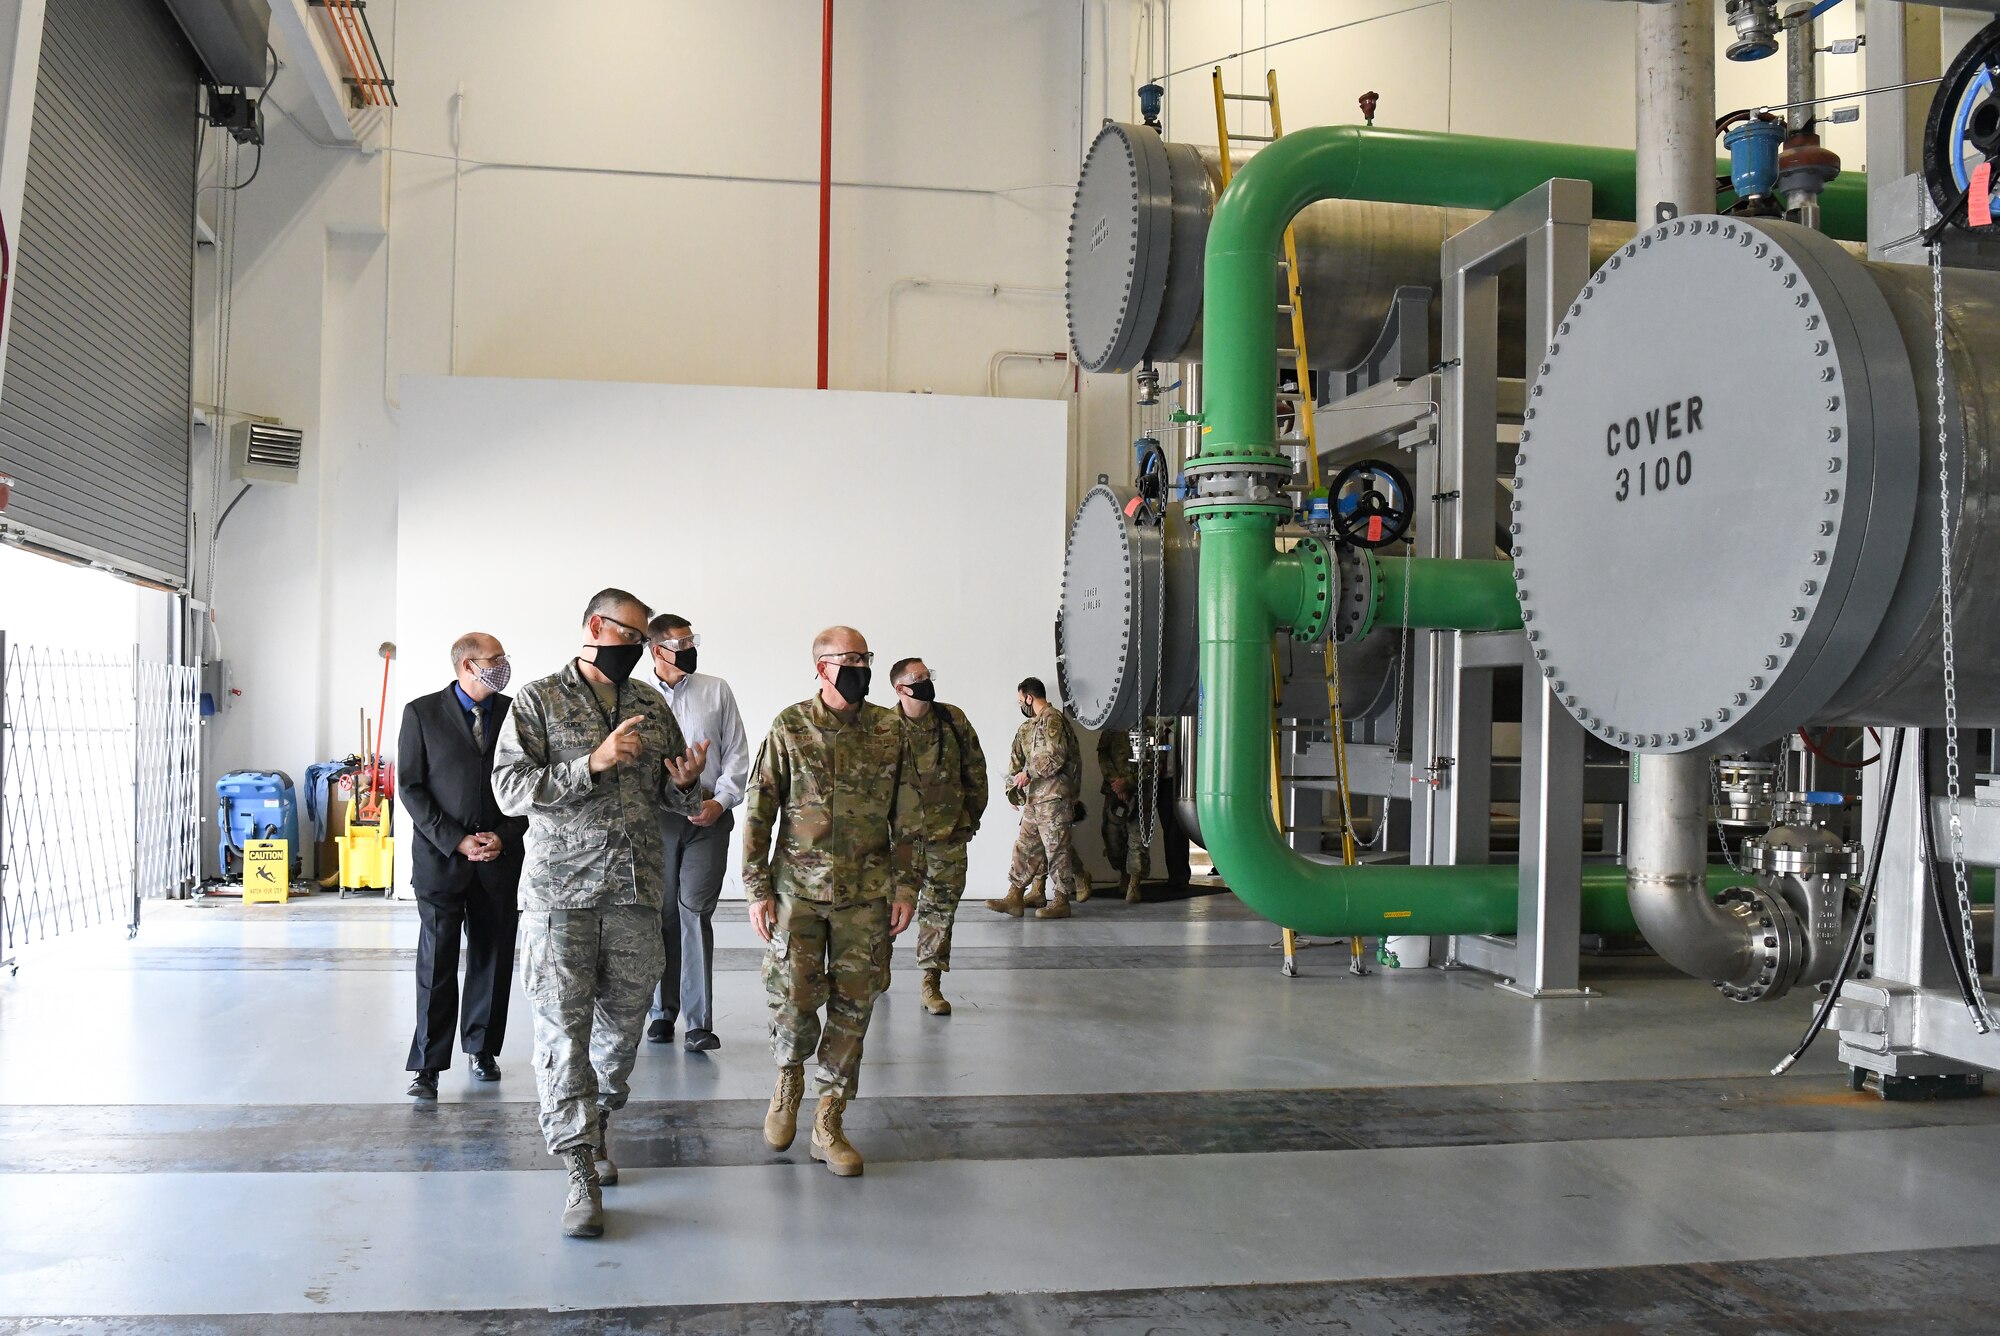 Lt. Col. Adam Quick, front left, director of the Arnold Engineering Development Complex (AEDC) Space and Missile Branch, briefs Vice Chief of Staff of the Air Force Gen. Stephen Wilson as they walk through part of the arc heater facility Aug. 11, 2020, at Arnold Air Force Base, Tenn. Arc heaters allow for the testing of thermal protection systems in simulated environments representative of hypersonic flight. (U.S. Air Force photo by Jill Pickett)